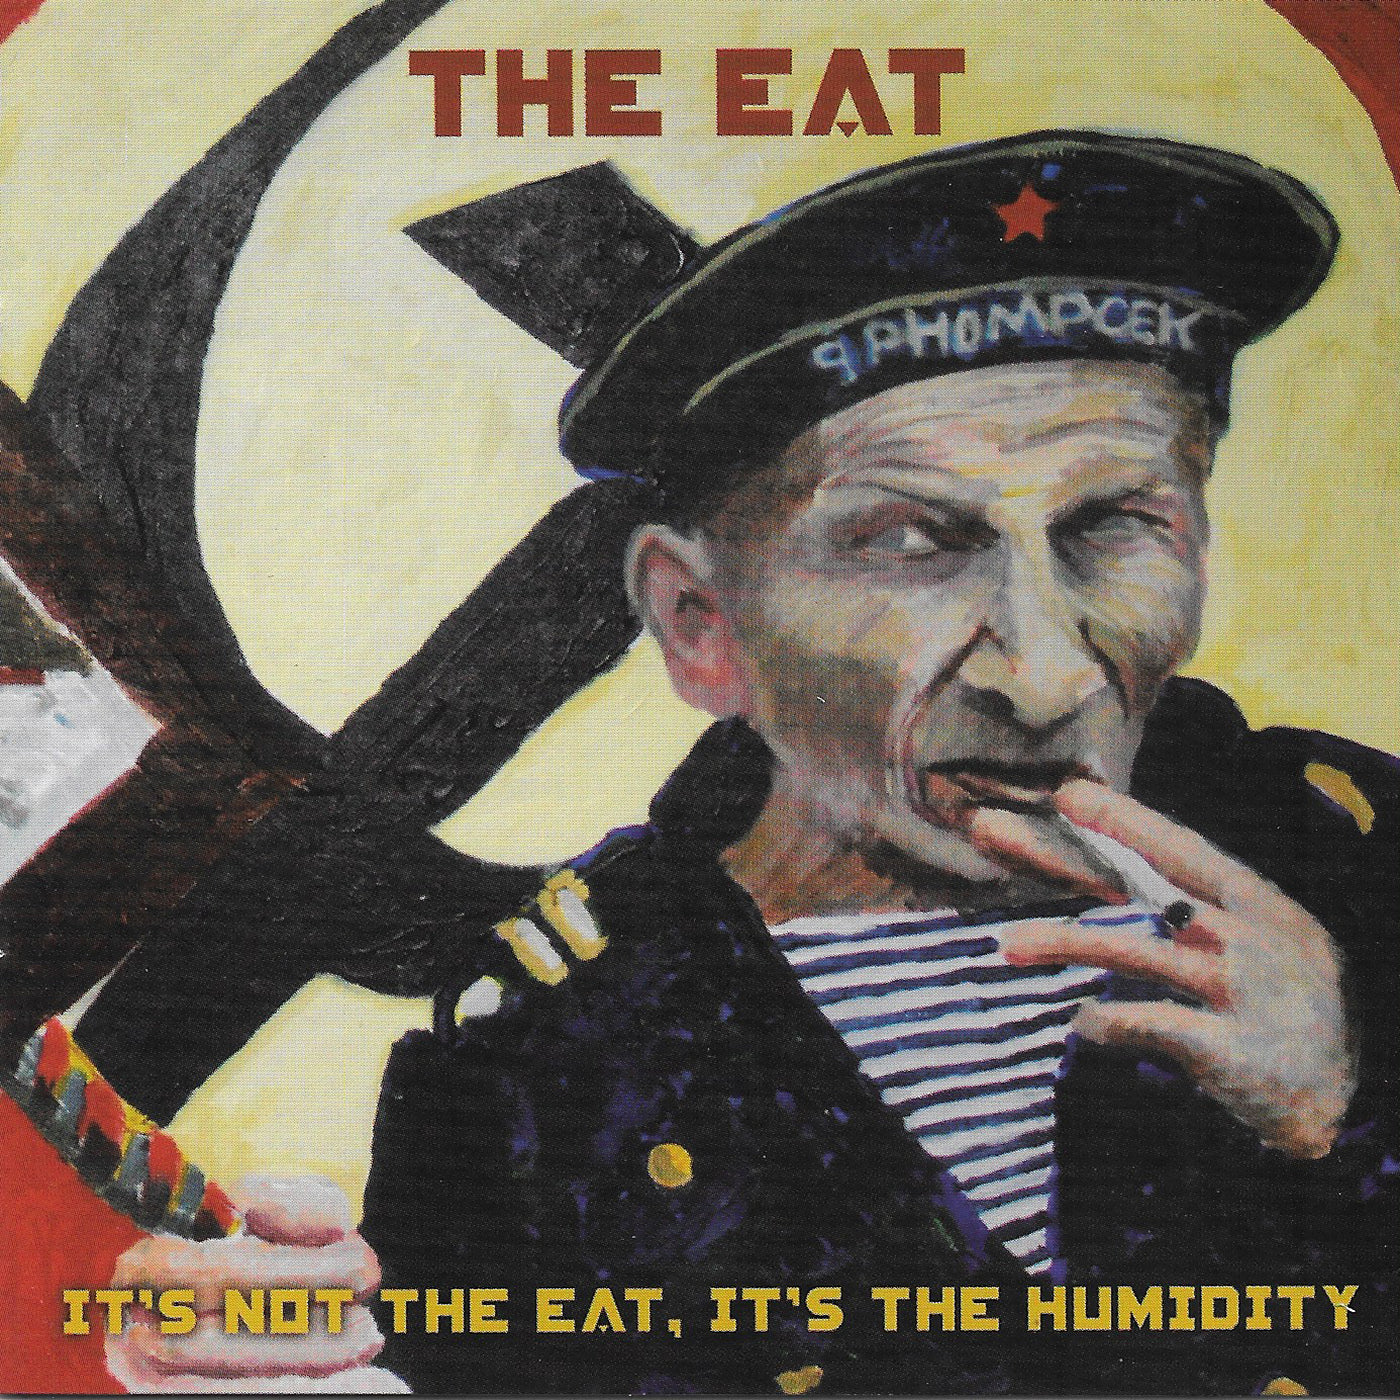 v377 - The Eat - "It's Not The Eat, It's The Humidity"